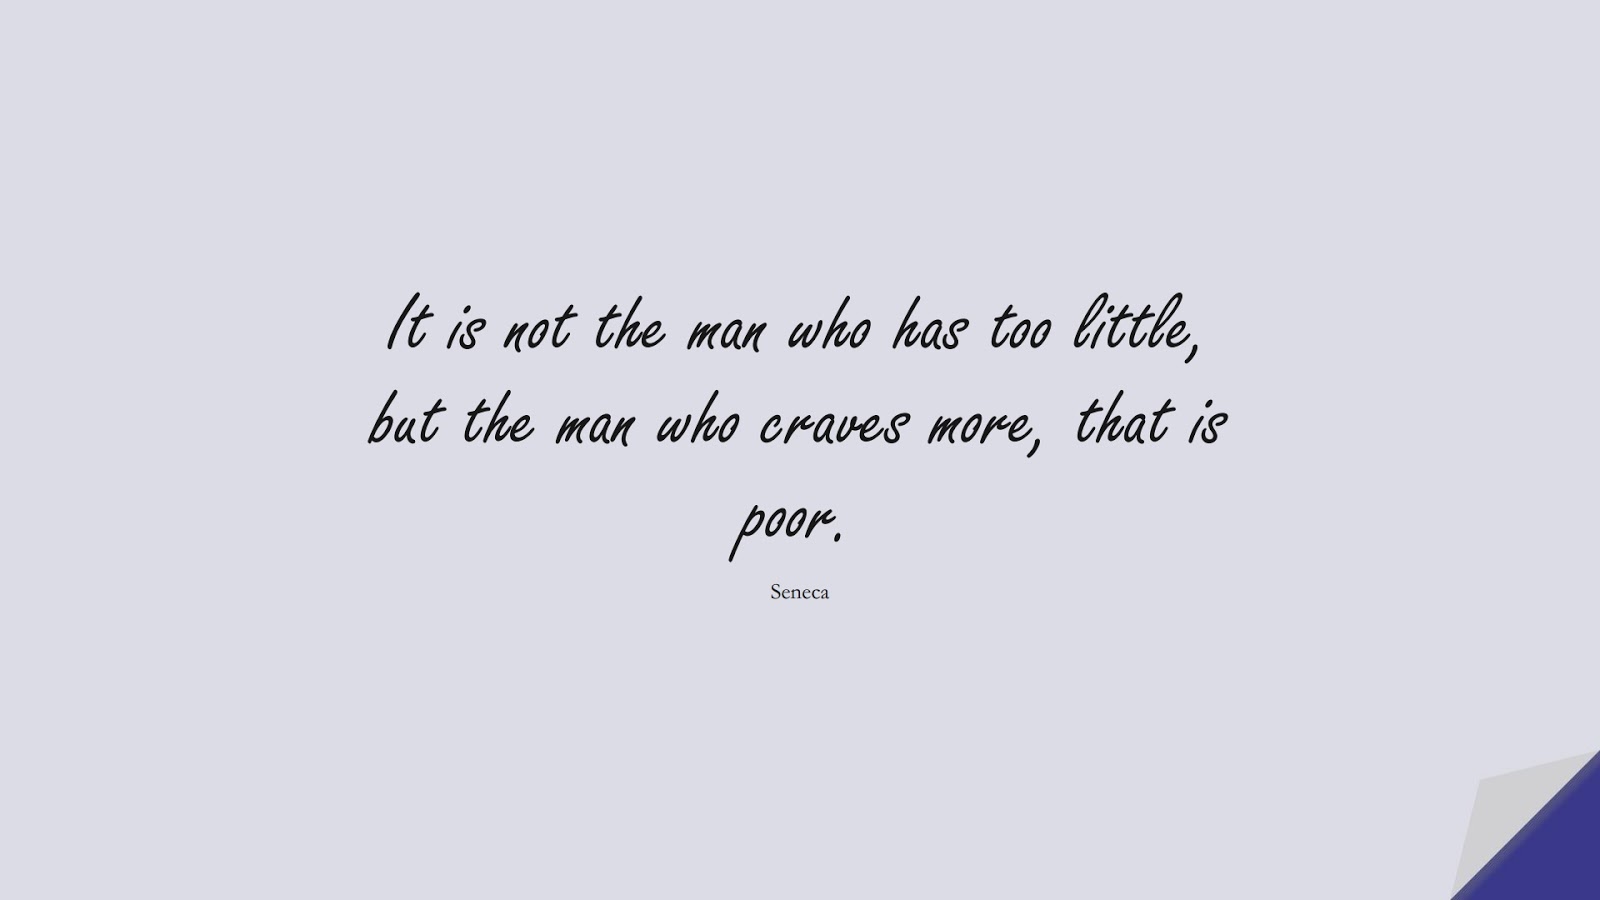 It is not the man who has too little, but the man who craves more, that is poor. (Seneca);  #StoicQuotes